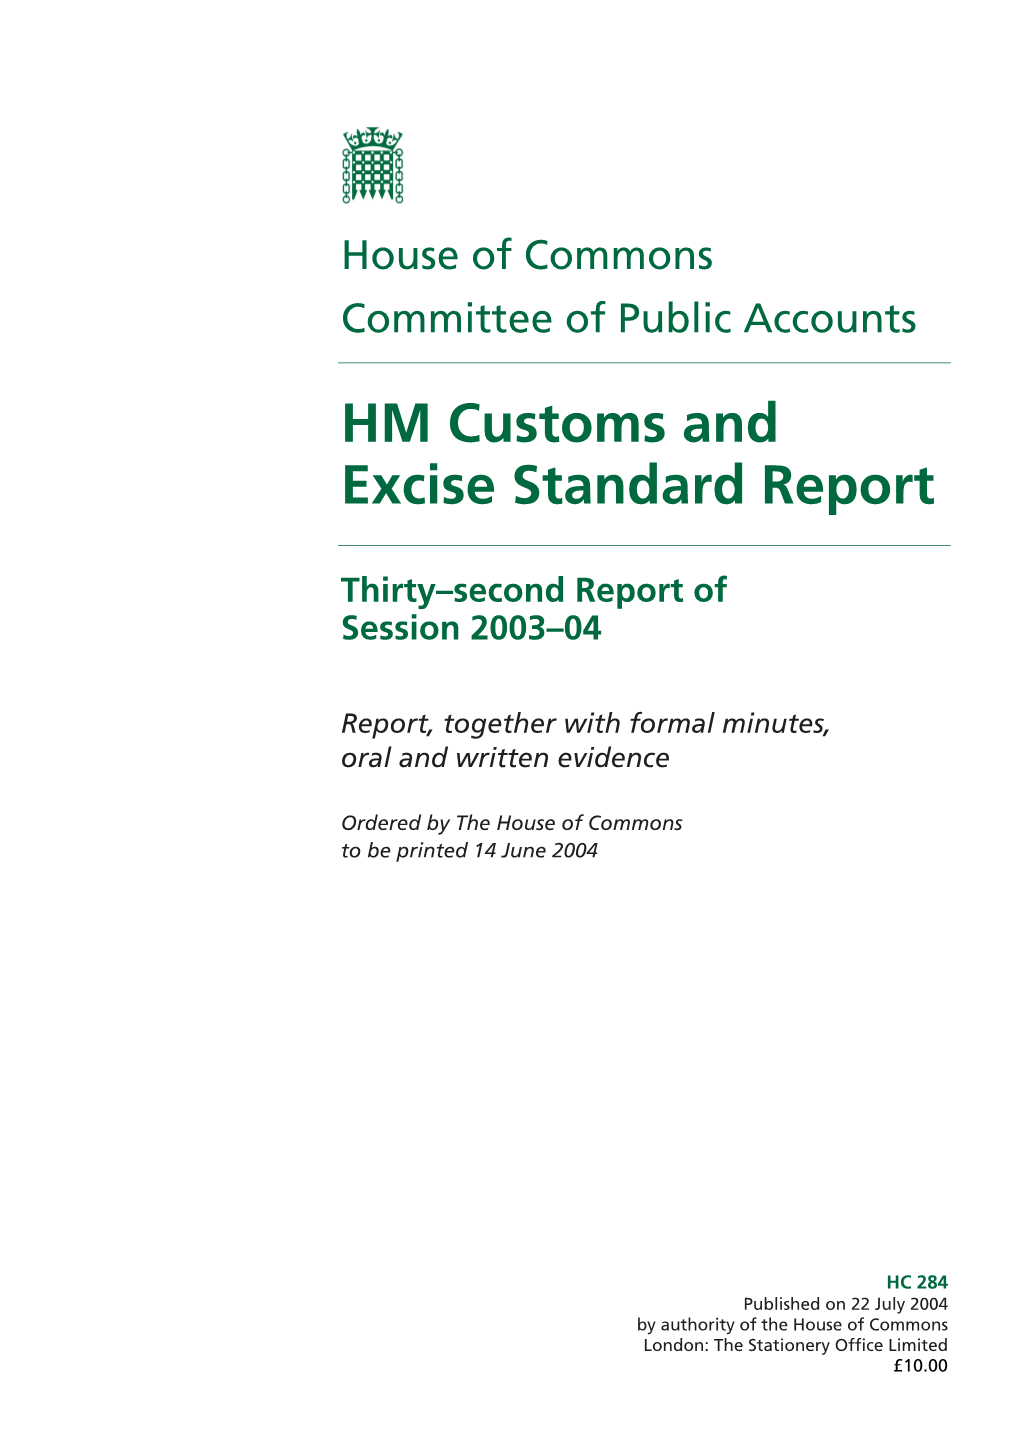 HM Customs and Excise Standard Report